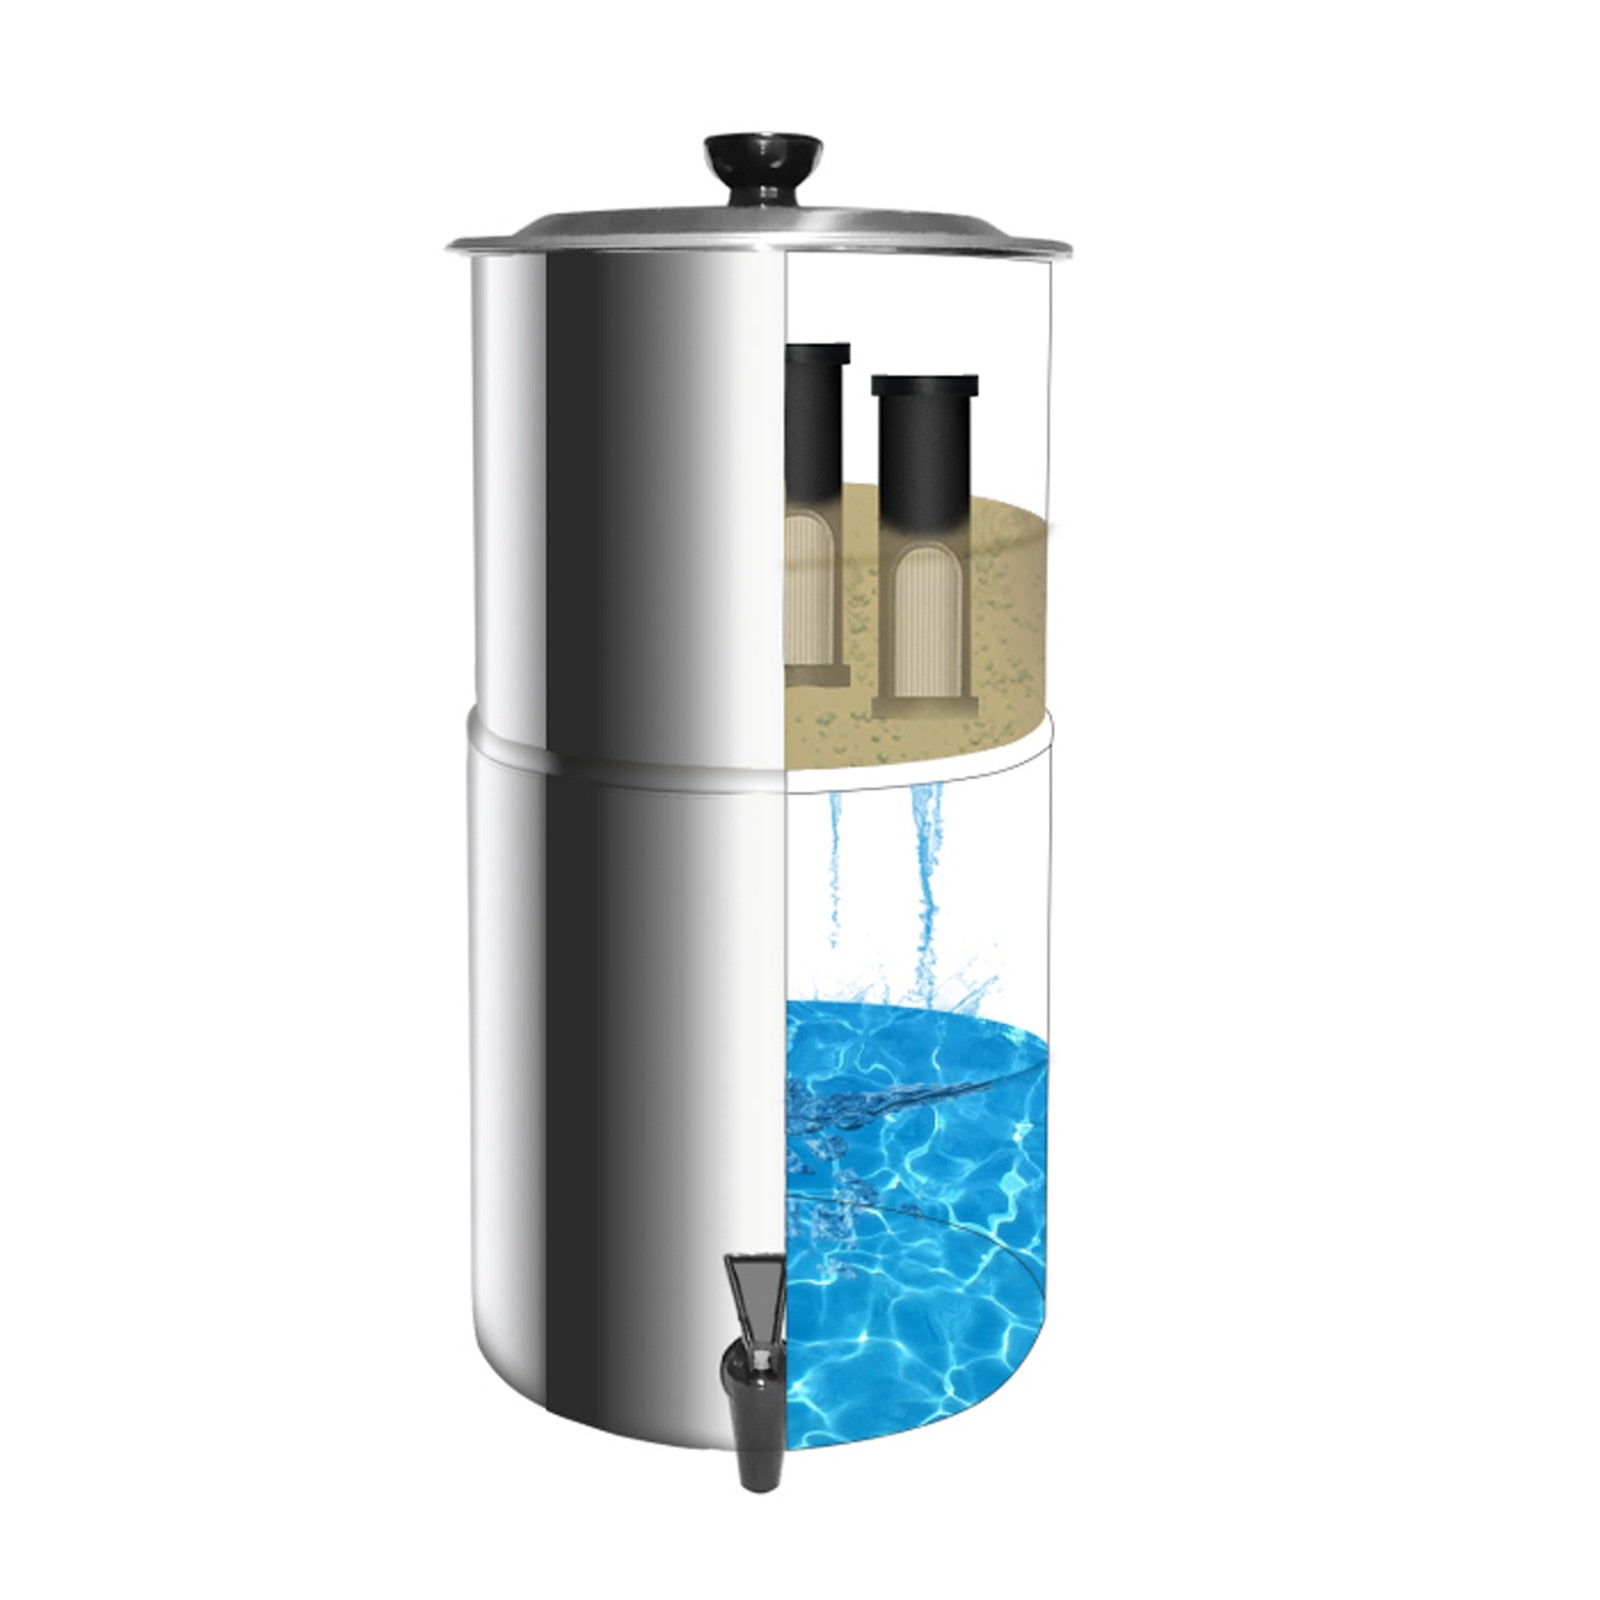 GGravity Water Filter System Water Filtration Bucket. Stainless steel